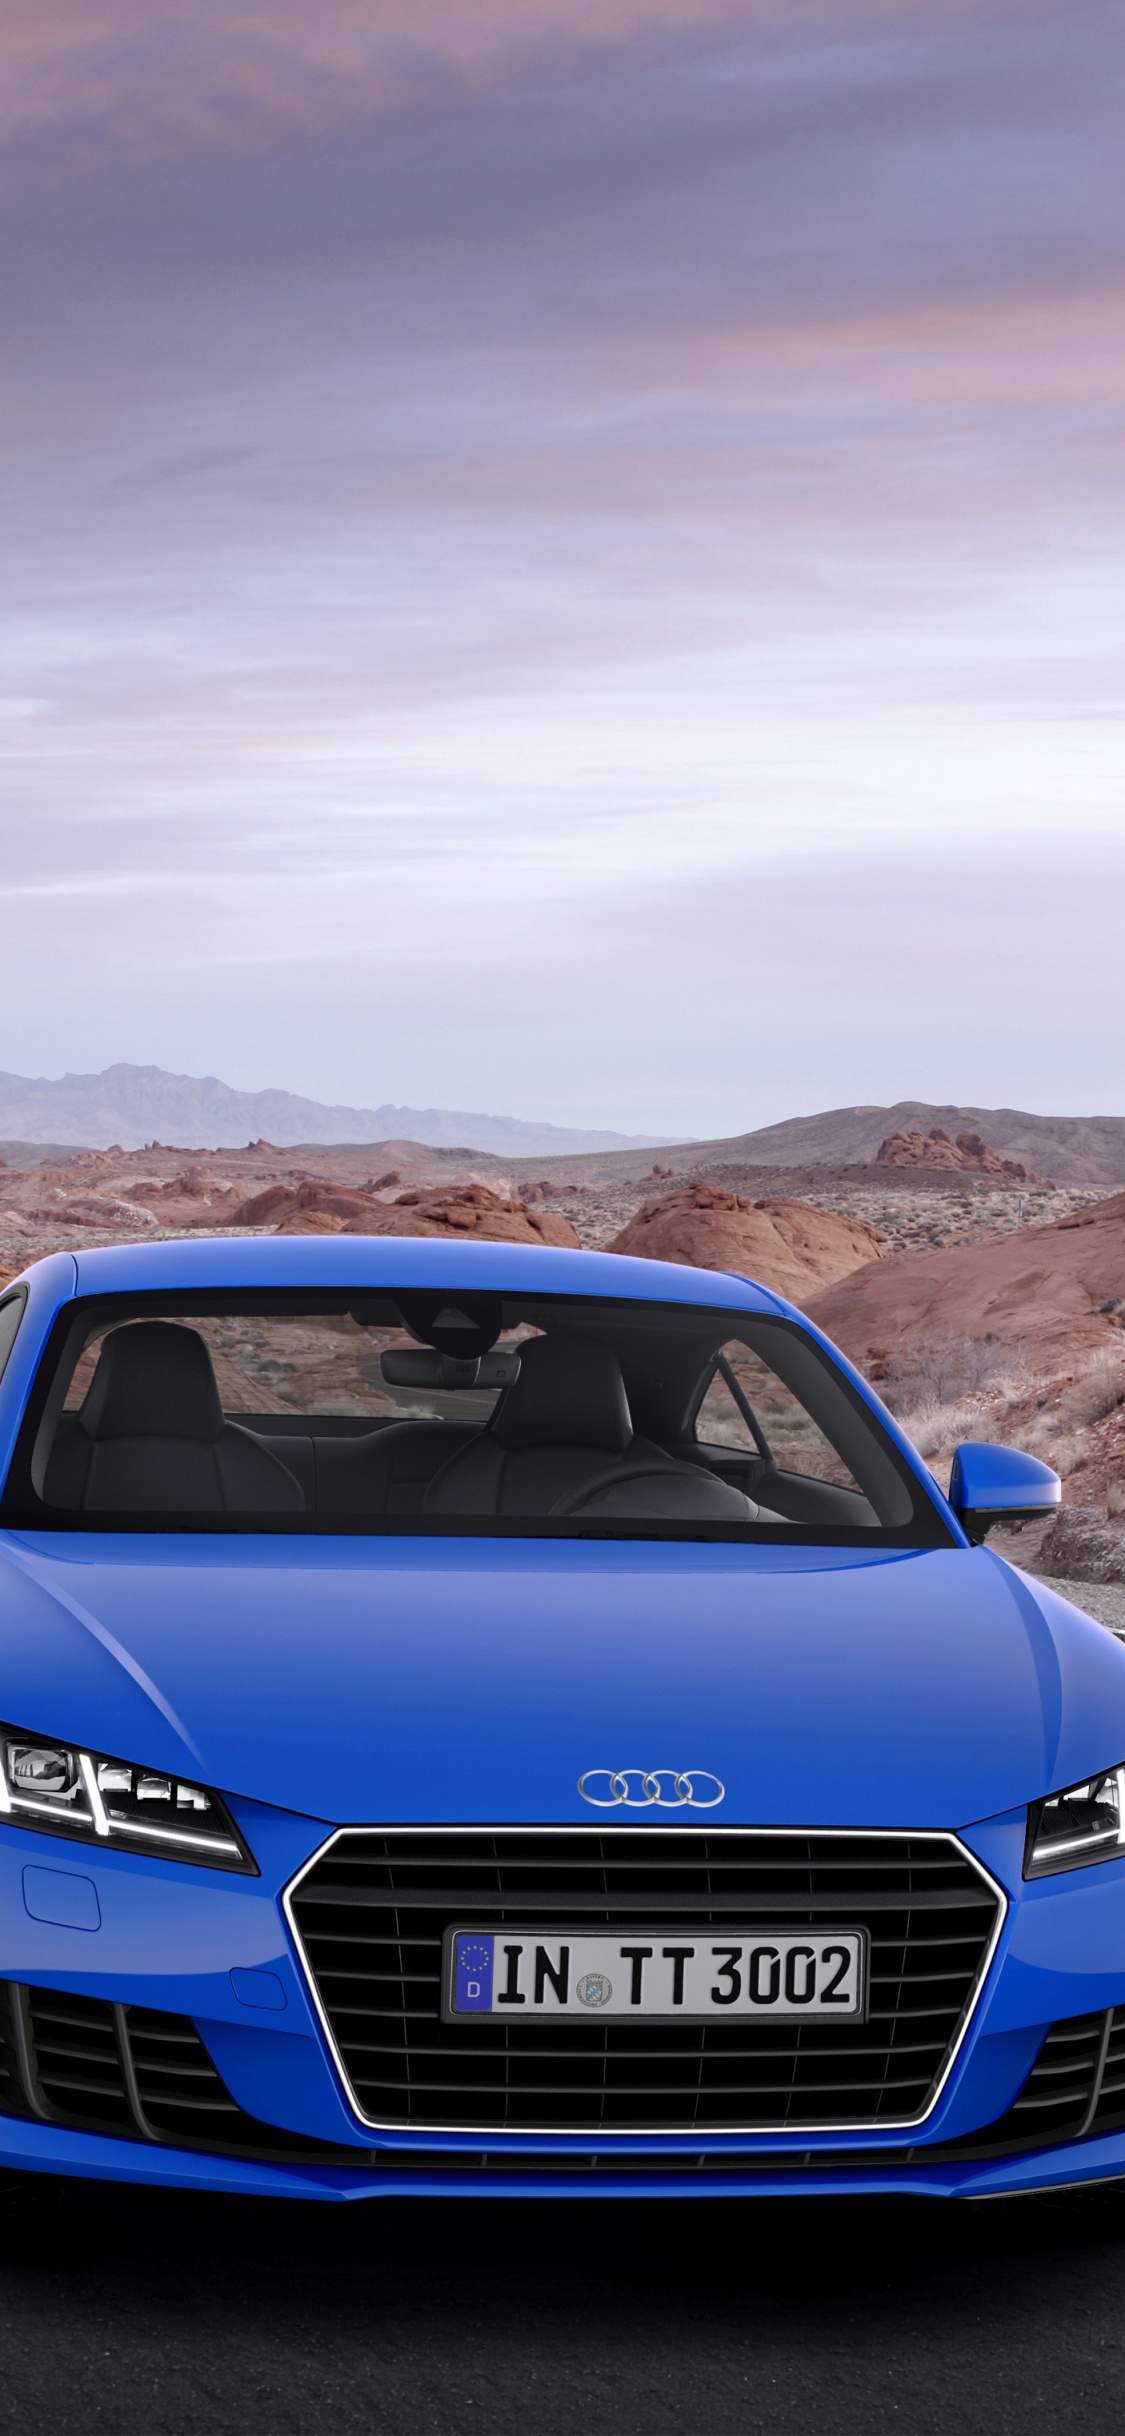 Blue Audi a 4 on Road During Daytime. Wallpaper in 1125x2436 Resolution